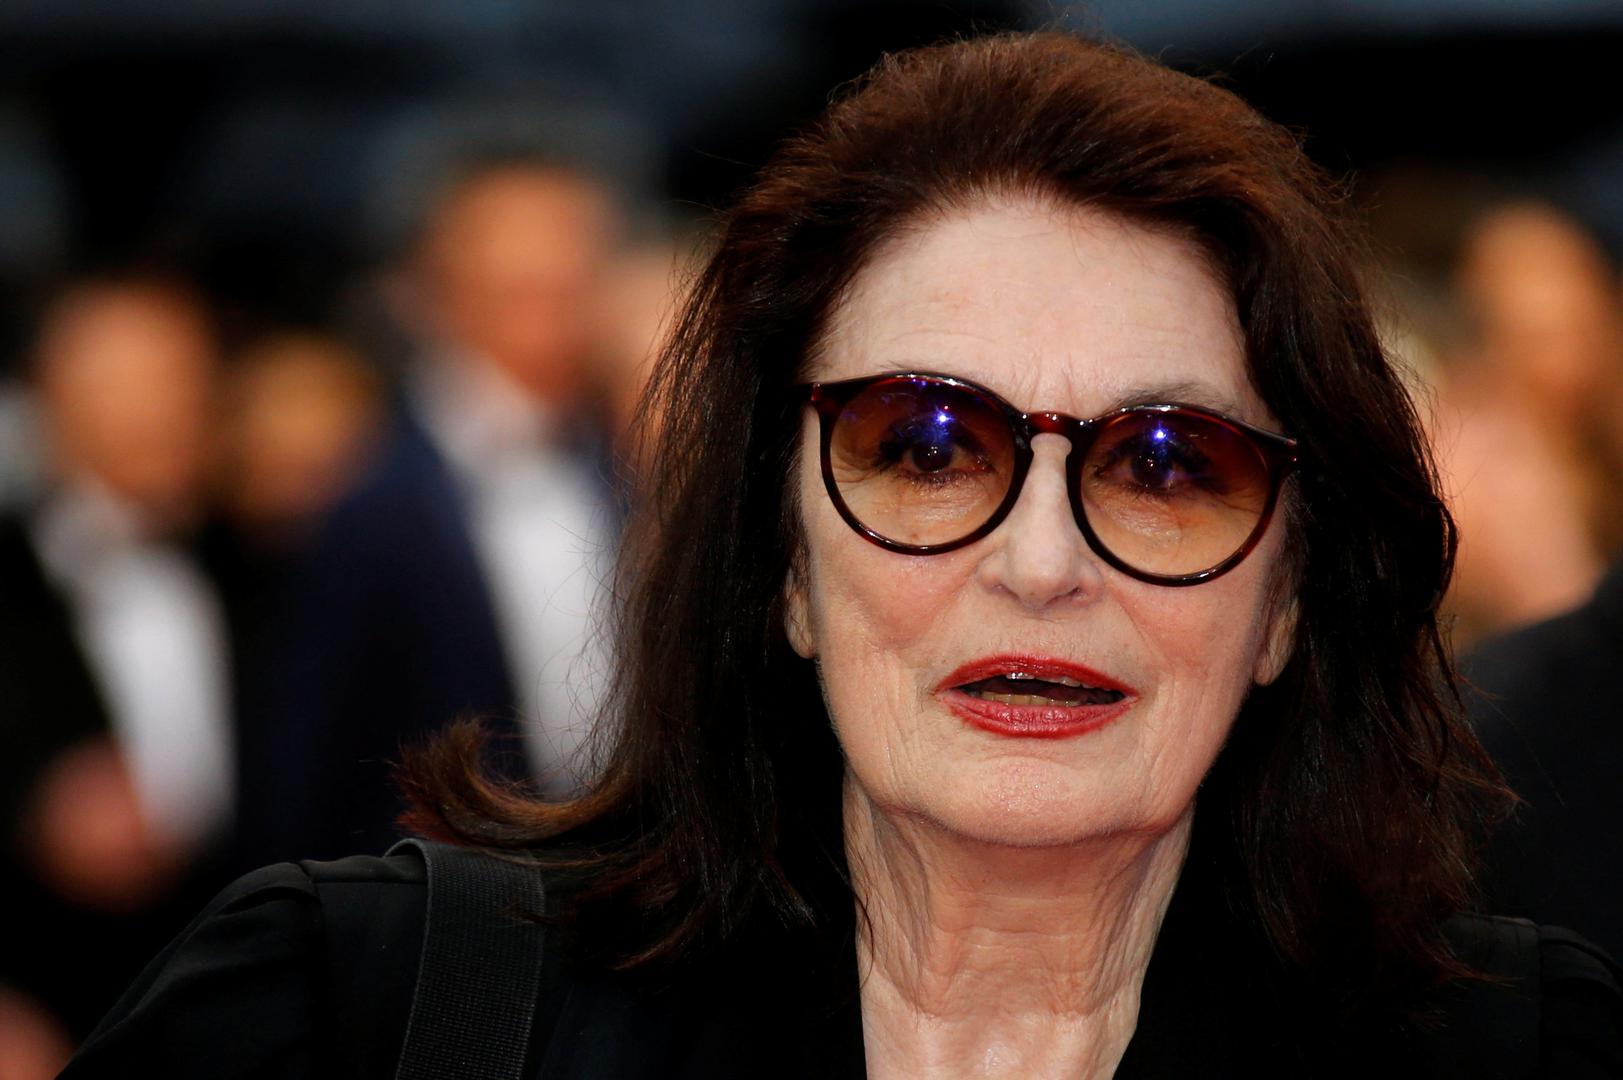 FILE PHOTO: 72nd Cannes Film Festival - Screening of the film "The Best Years of a Life" (Les plus belles annees d'une vie) Out of Competition - Red Carpet - Cannes, France, May 18, 2019. Anouk Aimee poses. REUTERS/Jean-Paul Pelissier/File Photo Photo: JEAN-PAUL PELISSIER/REUTERS